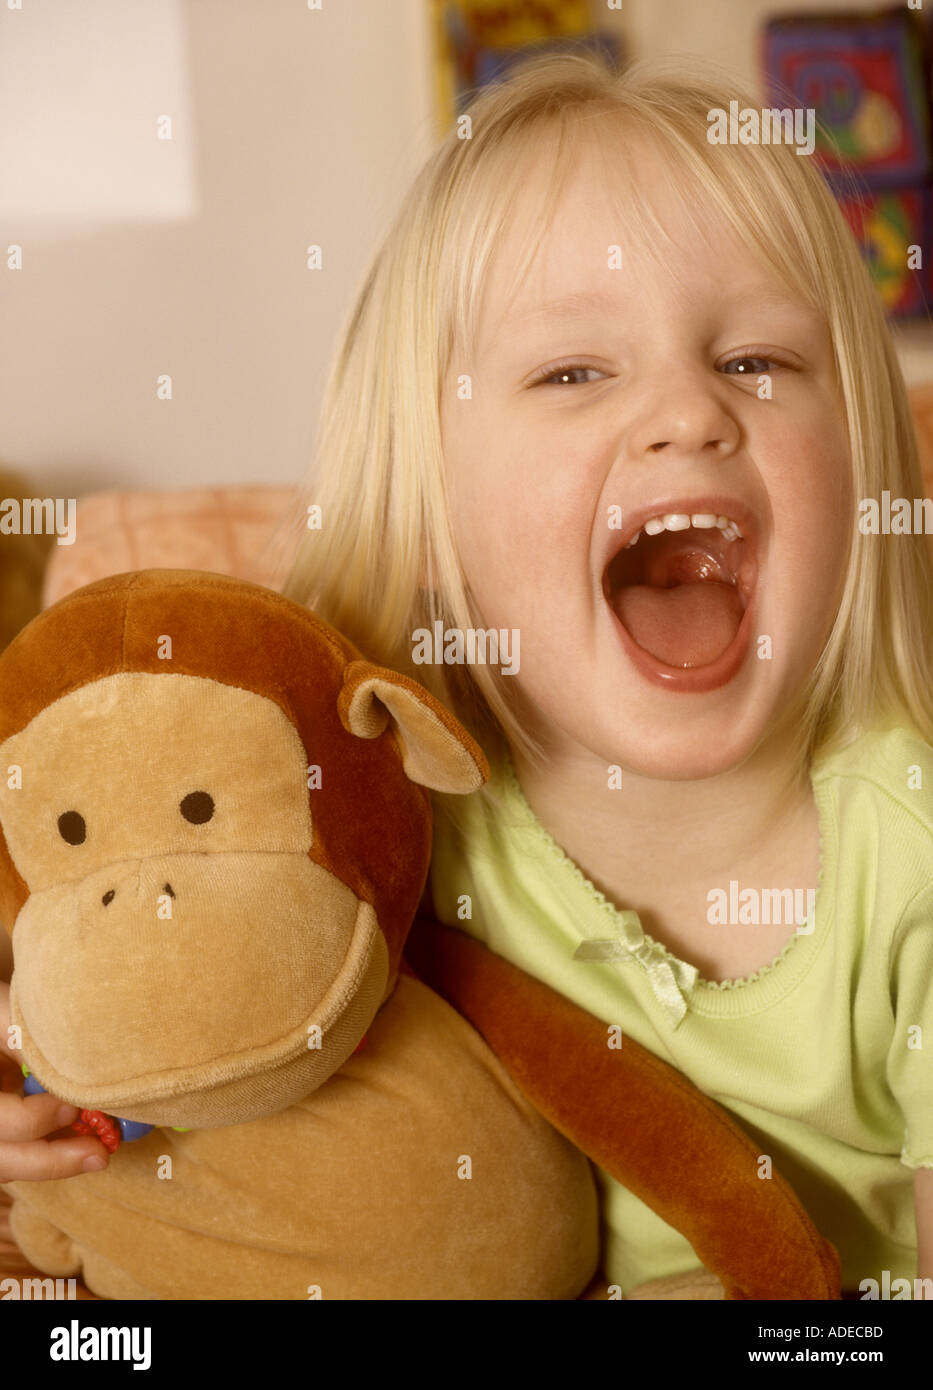 Pretty young girl cuddling a soft toy shouting Stock Photo